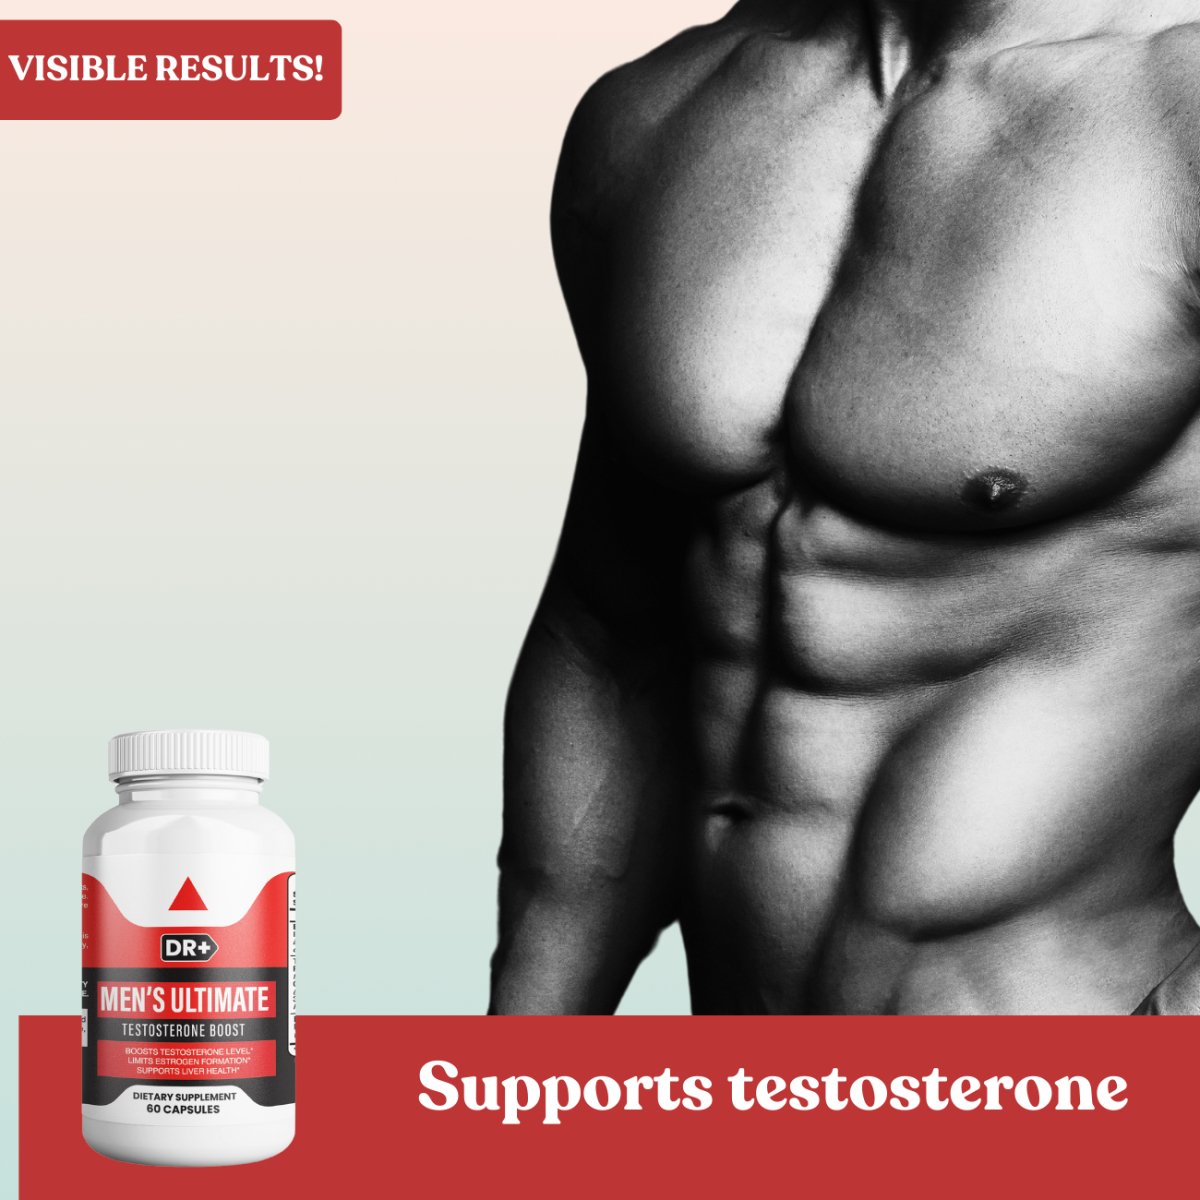 Natural PCT Testosterone Booster - Restores Hormone Levels, Control Estrogen, Support Muscle Mass | 60 Capsules